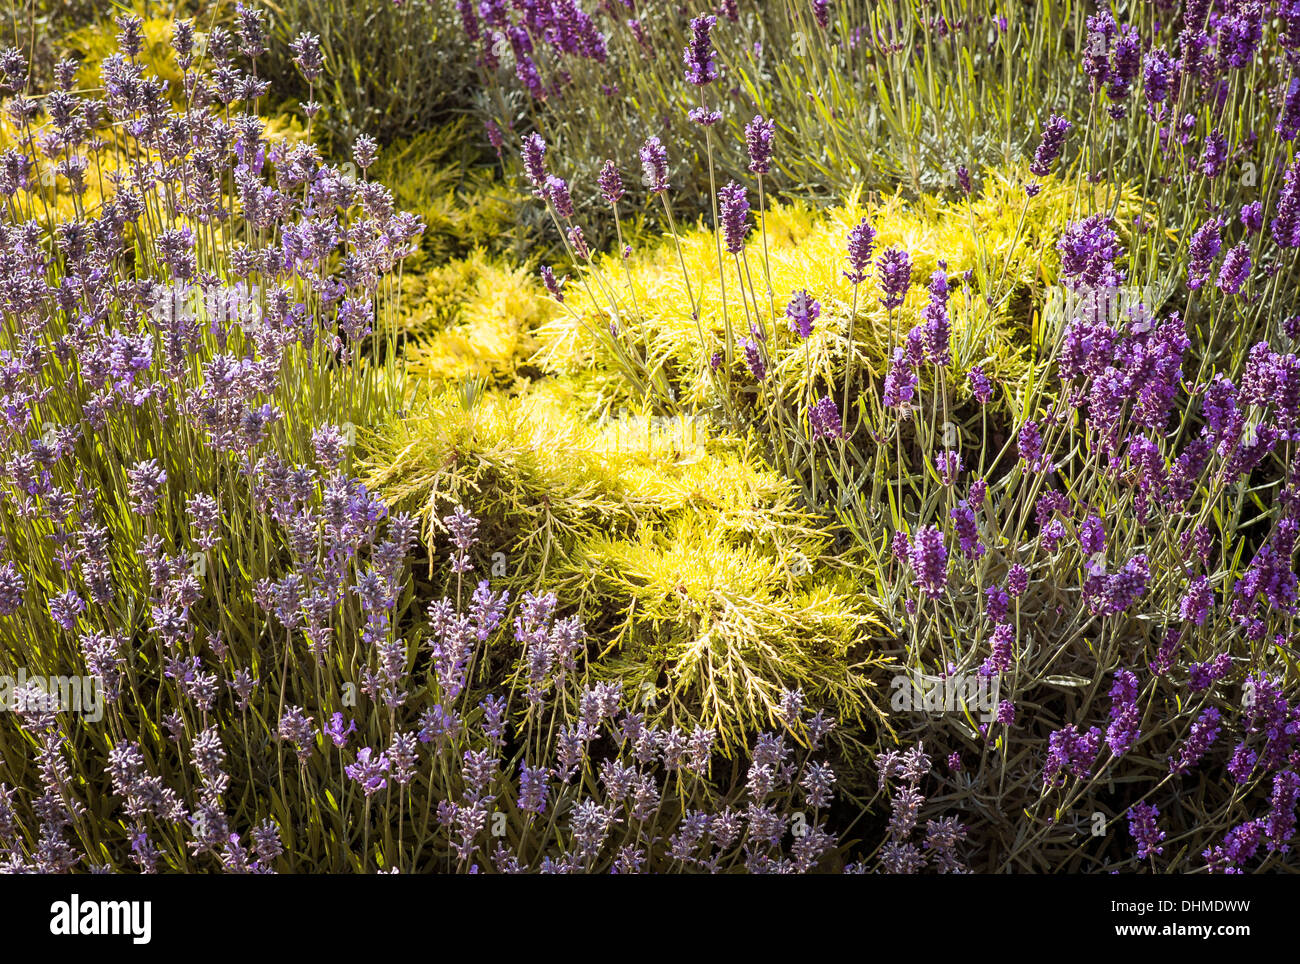 Lavender and golden conifer bed of flowers in an English garden Stock Photo